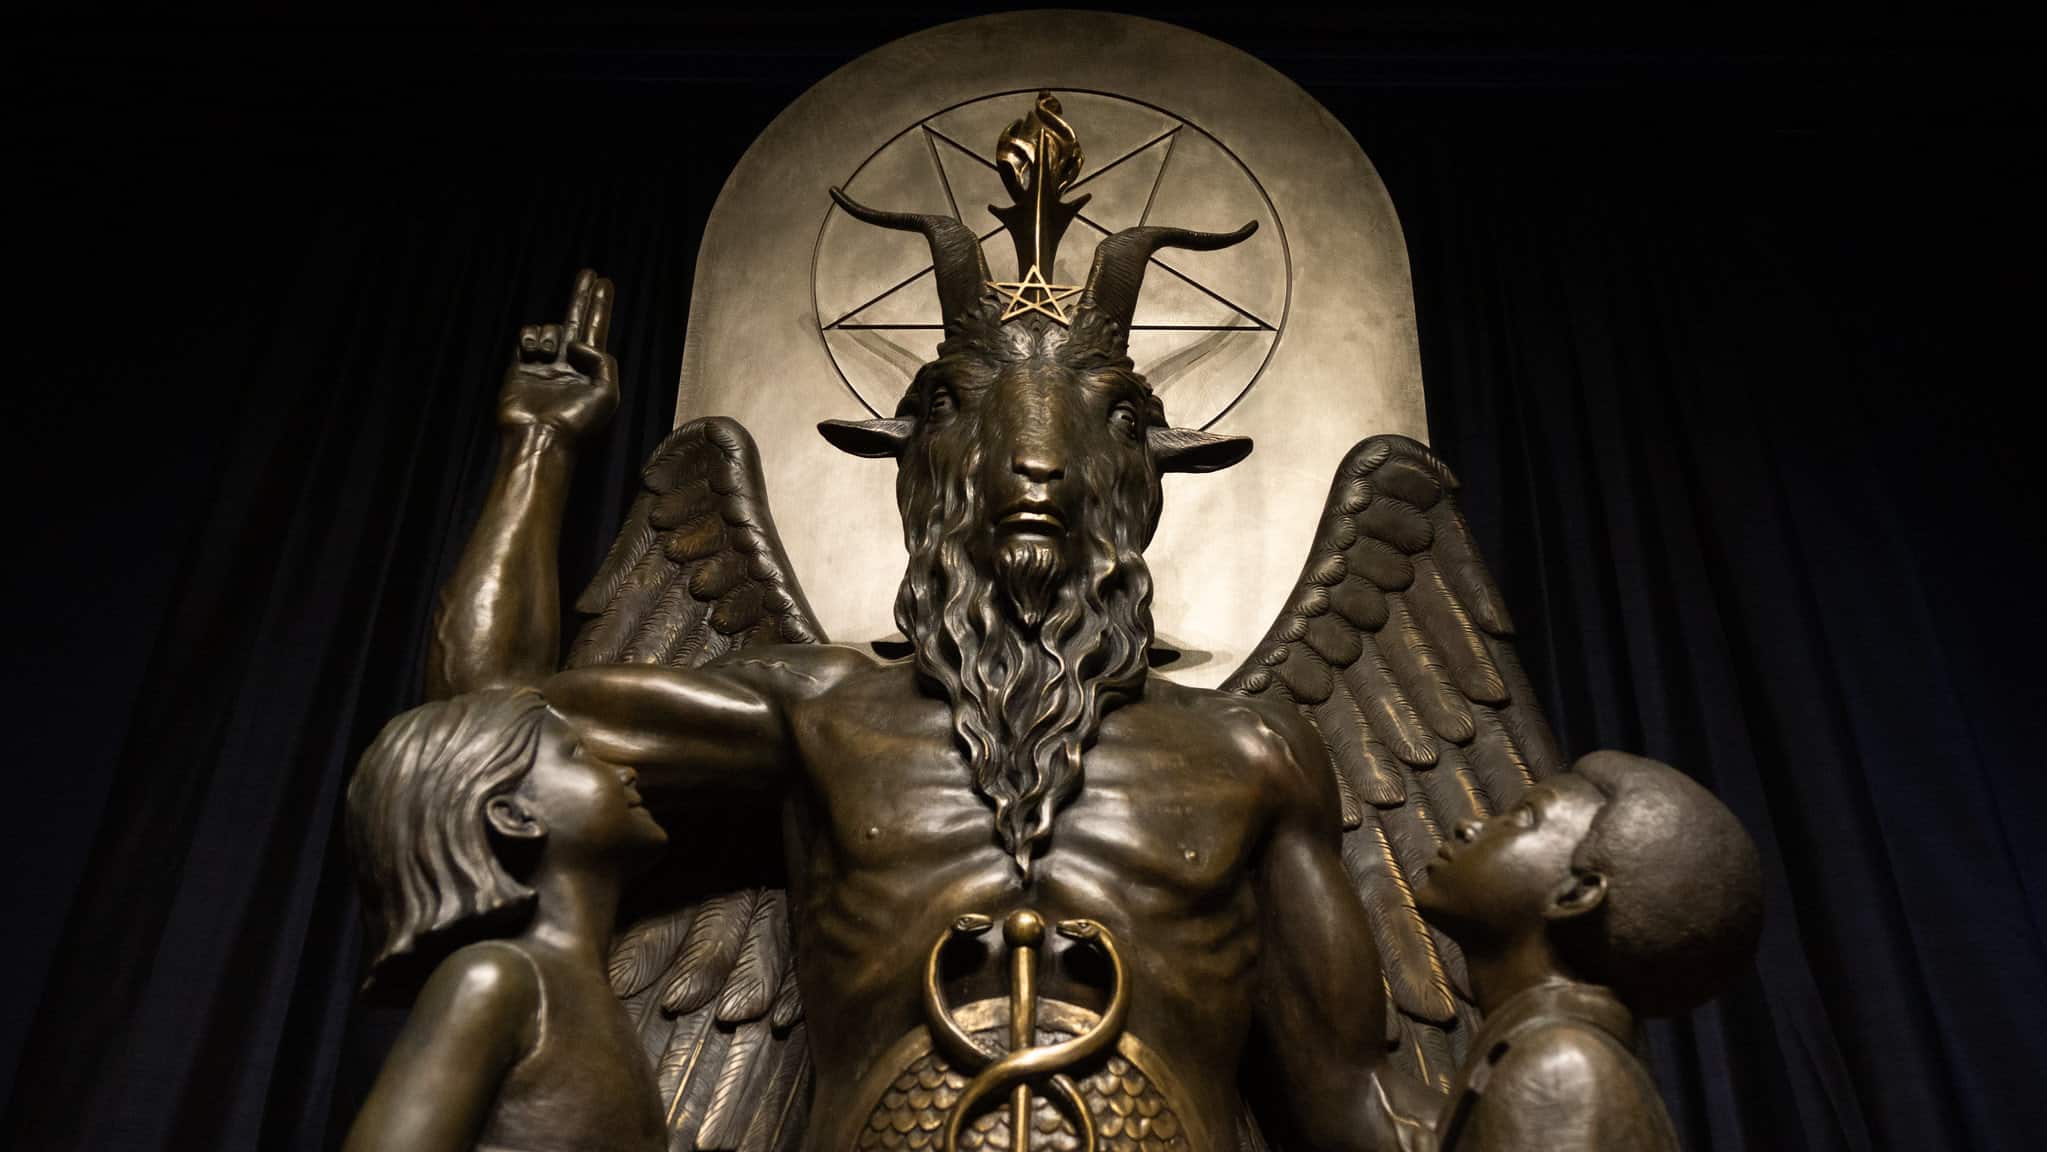 A cast bronze figure is shown appearing to be half man, half goat with wings. A pentagram is between the horns on it's head.